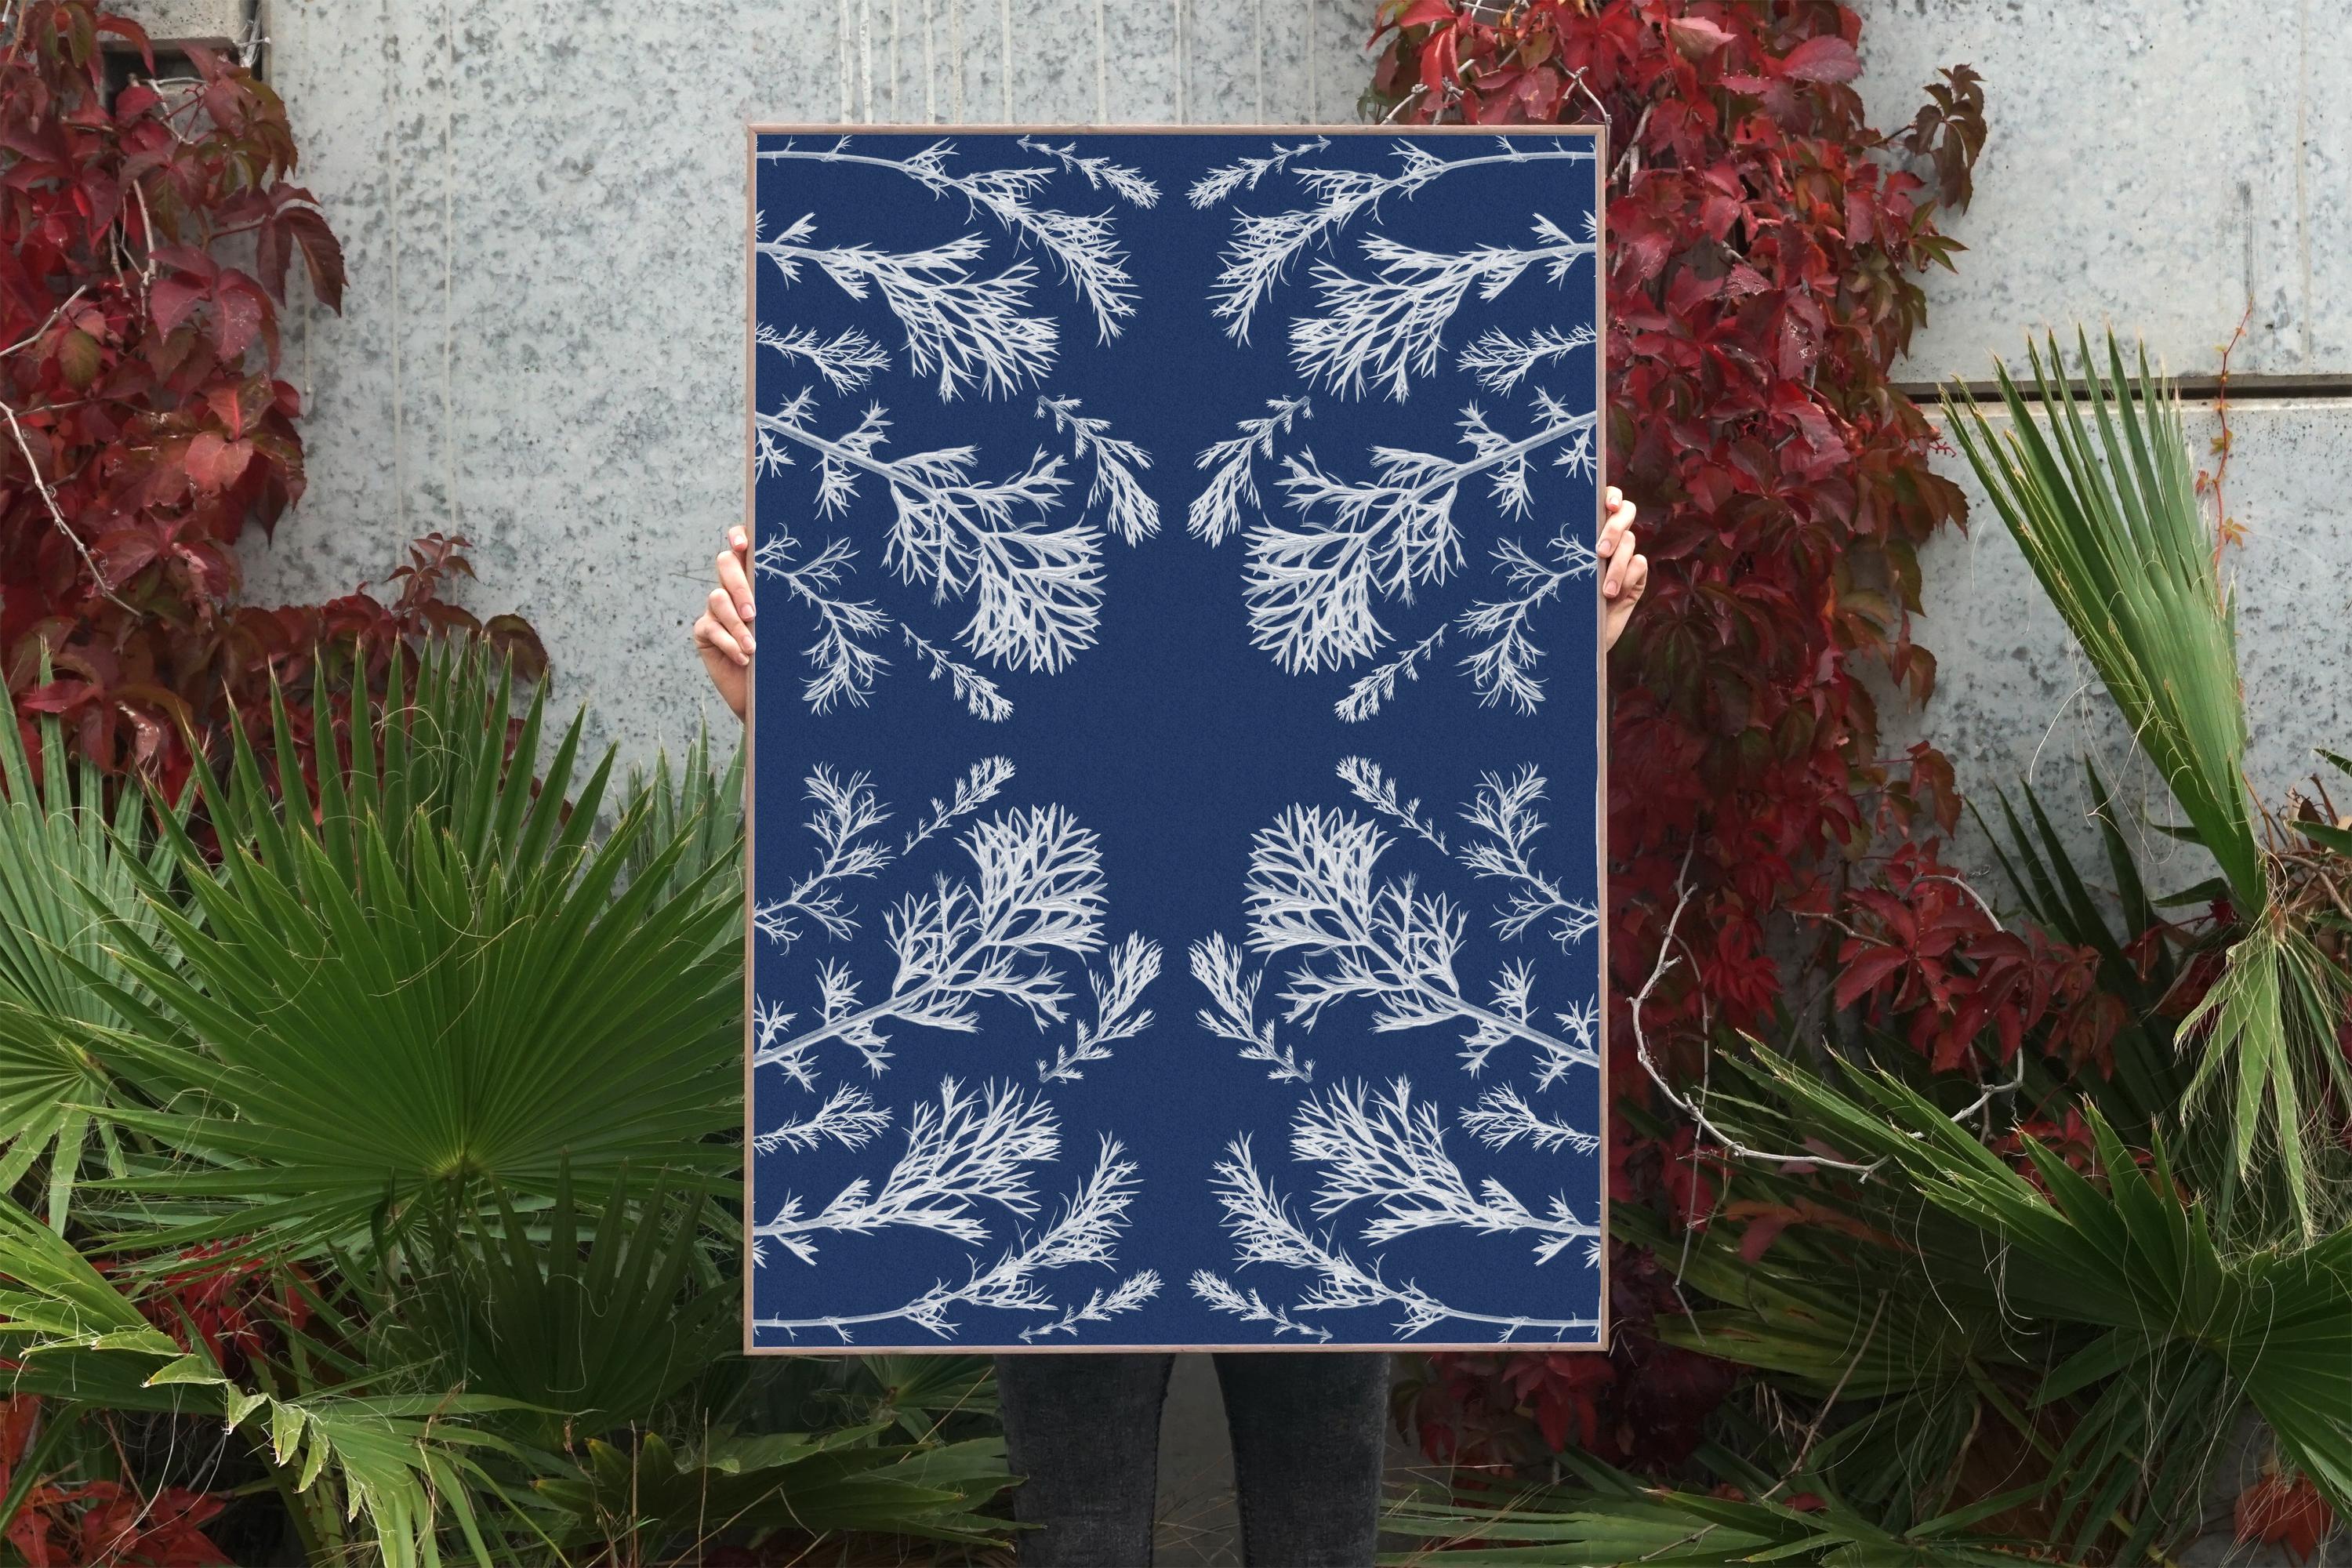 Classic Botanical Cyanotype, Handmade Using Natural Sunlight, Limited Edition  - Photograph by Kind of Cyan